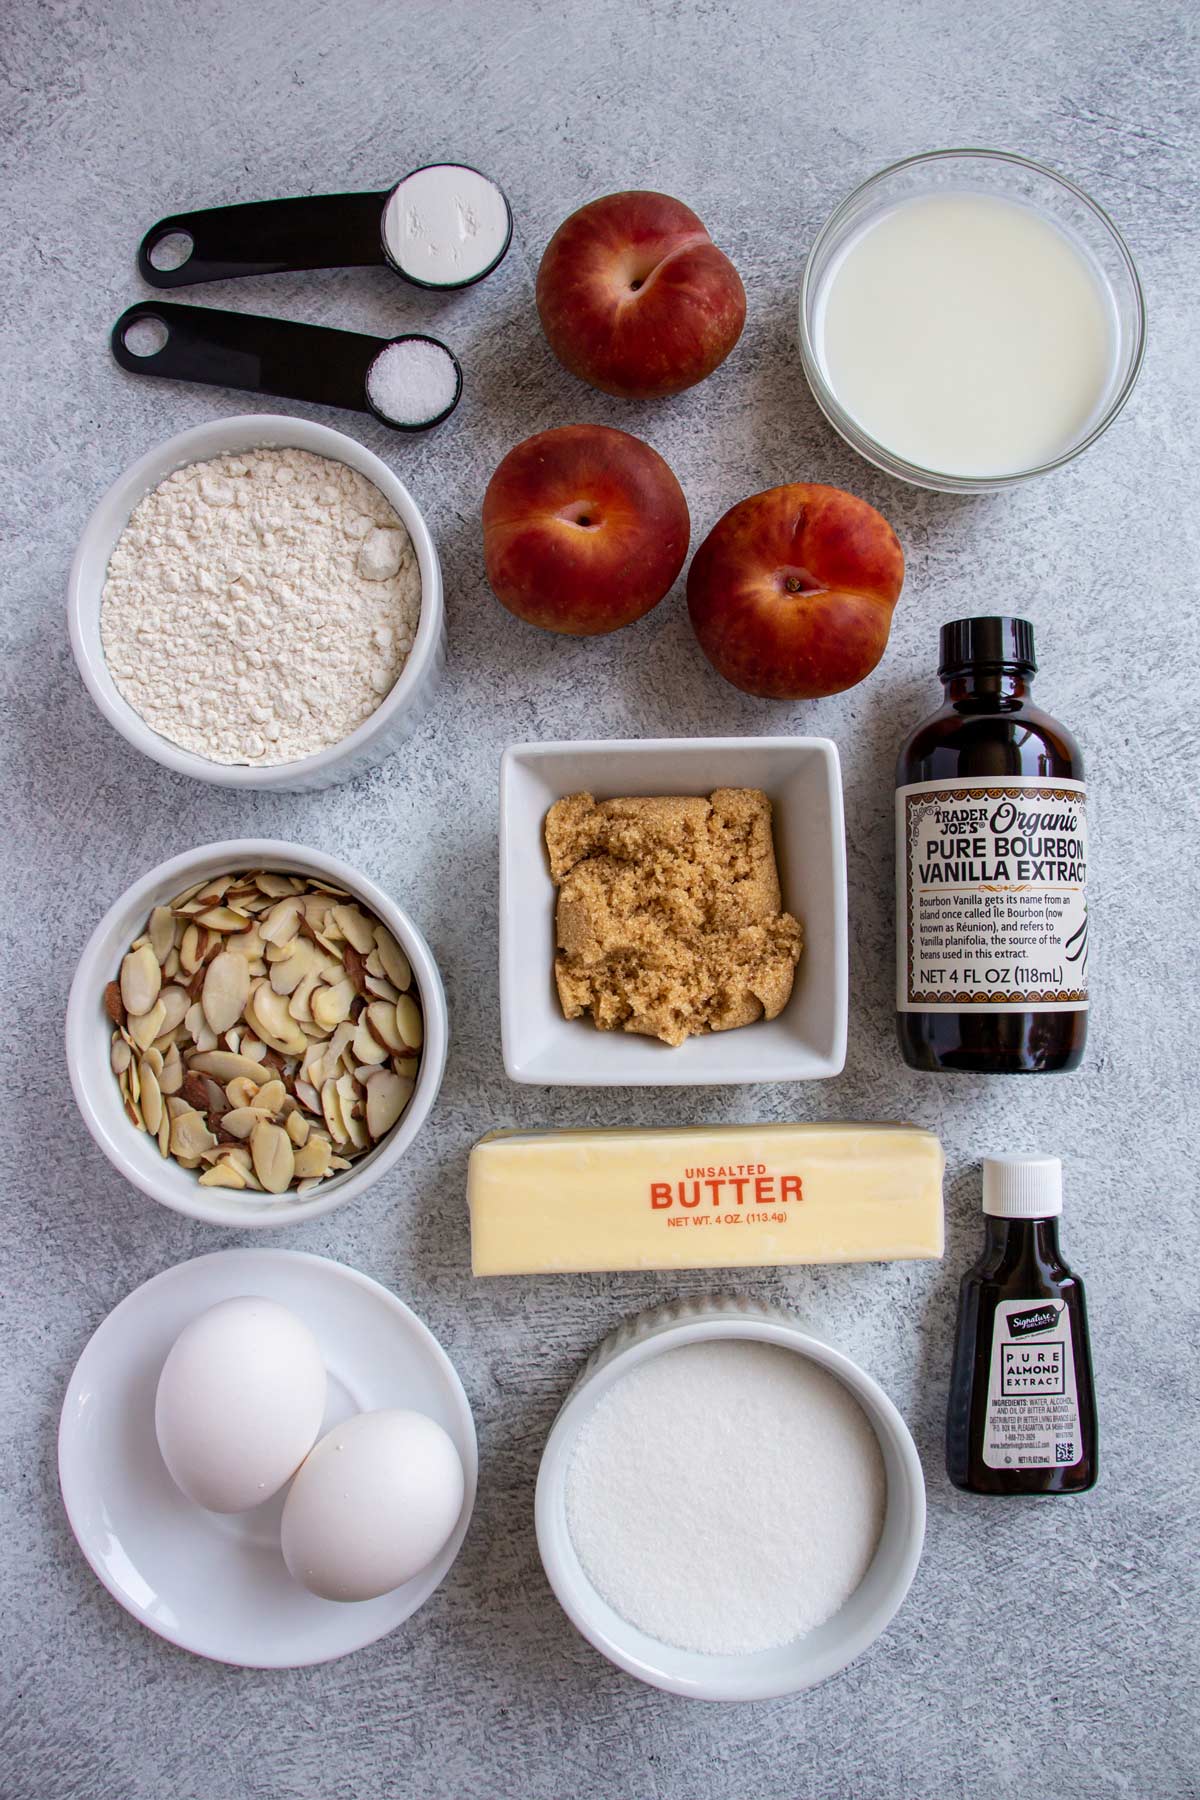 Ingredients for plum almond muffins on a grey background.